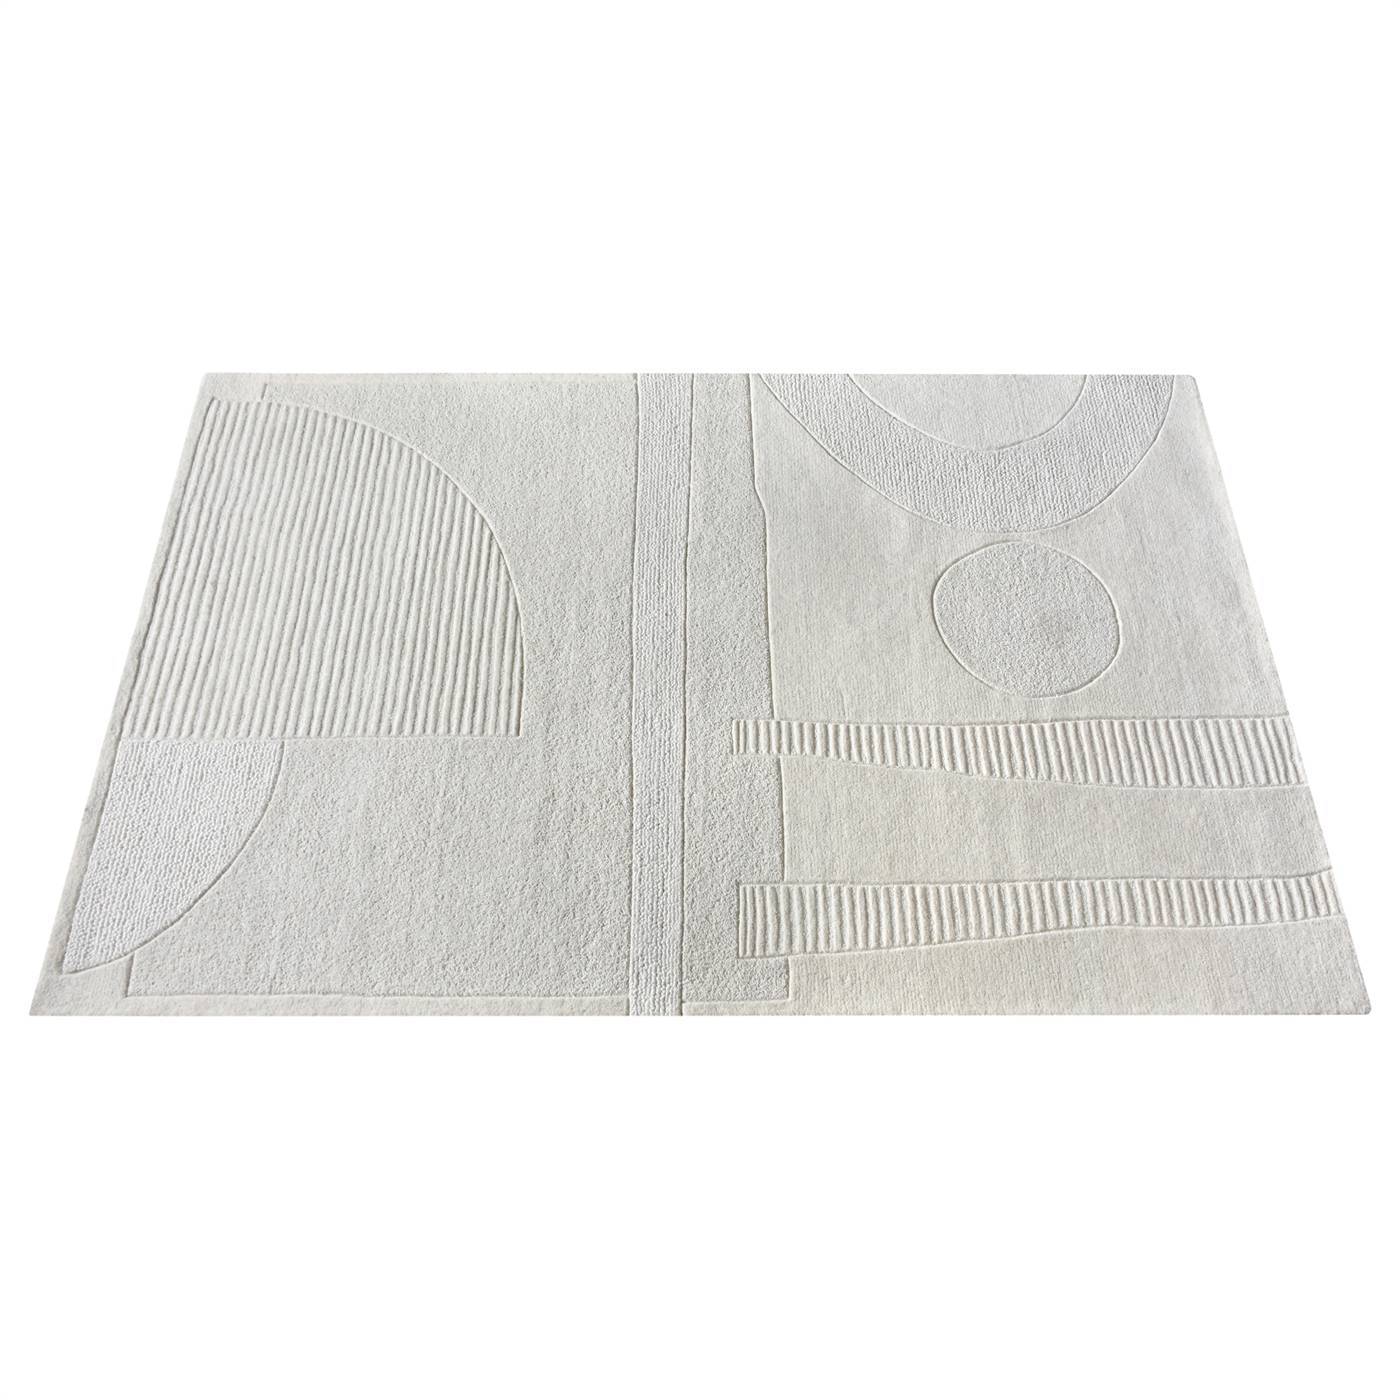 Area Rug, Bedroom Rug, Living Room Rug, Living Area Rug, Indian Rug, Office Carpet, Office Rug, Shop Rug Online, Natural White, Wool, Hand Tufted, Handwoven, Cut And Loop, Texture 